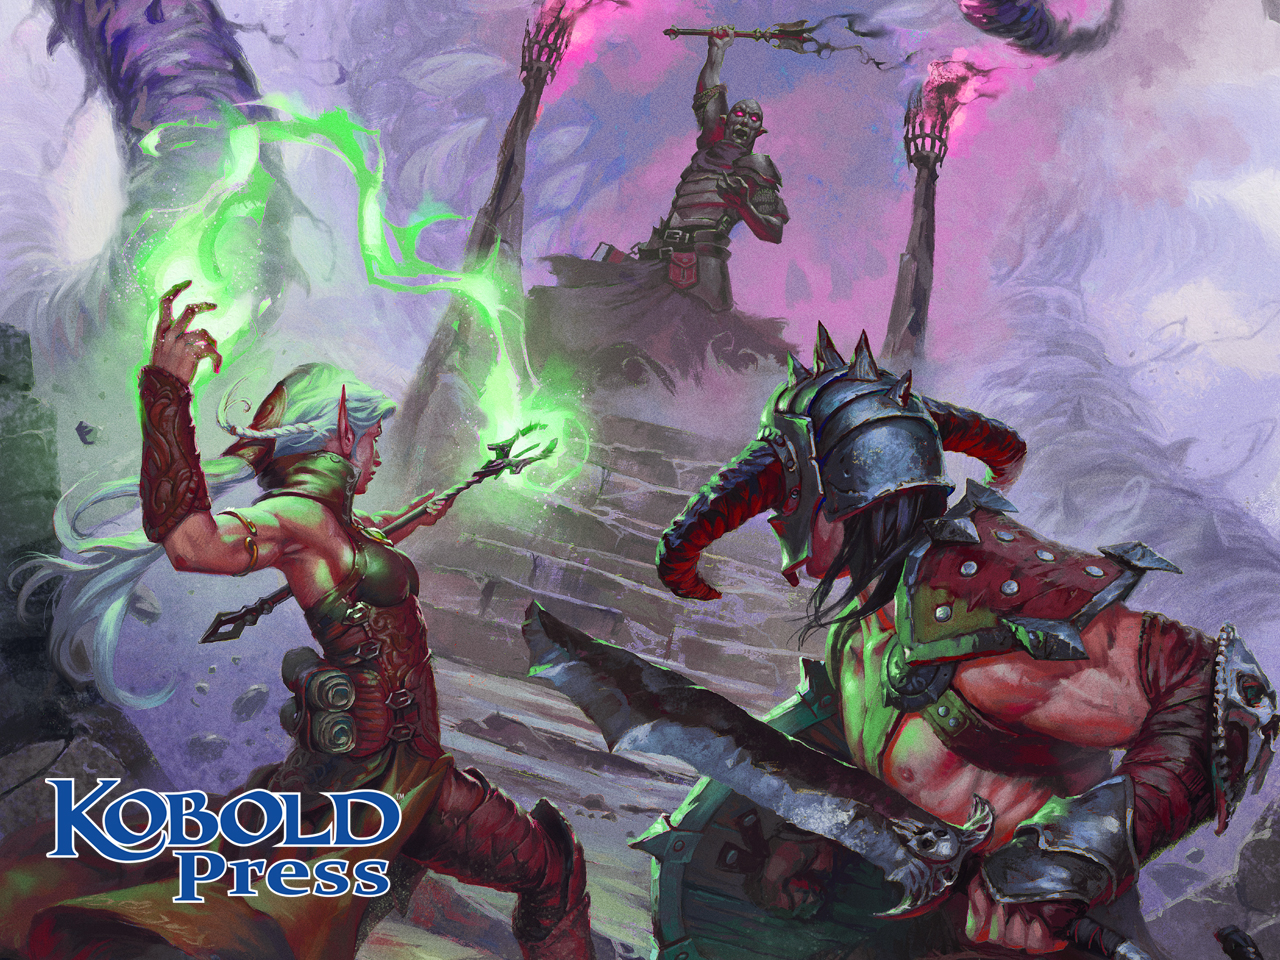 Kobold press' “5E clone” aims to end “monopoly on D&D”